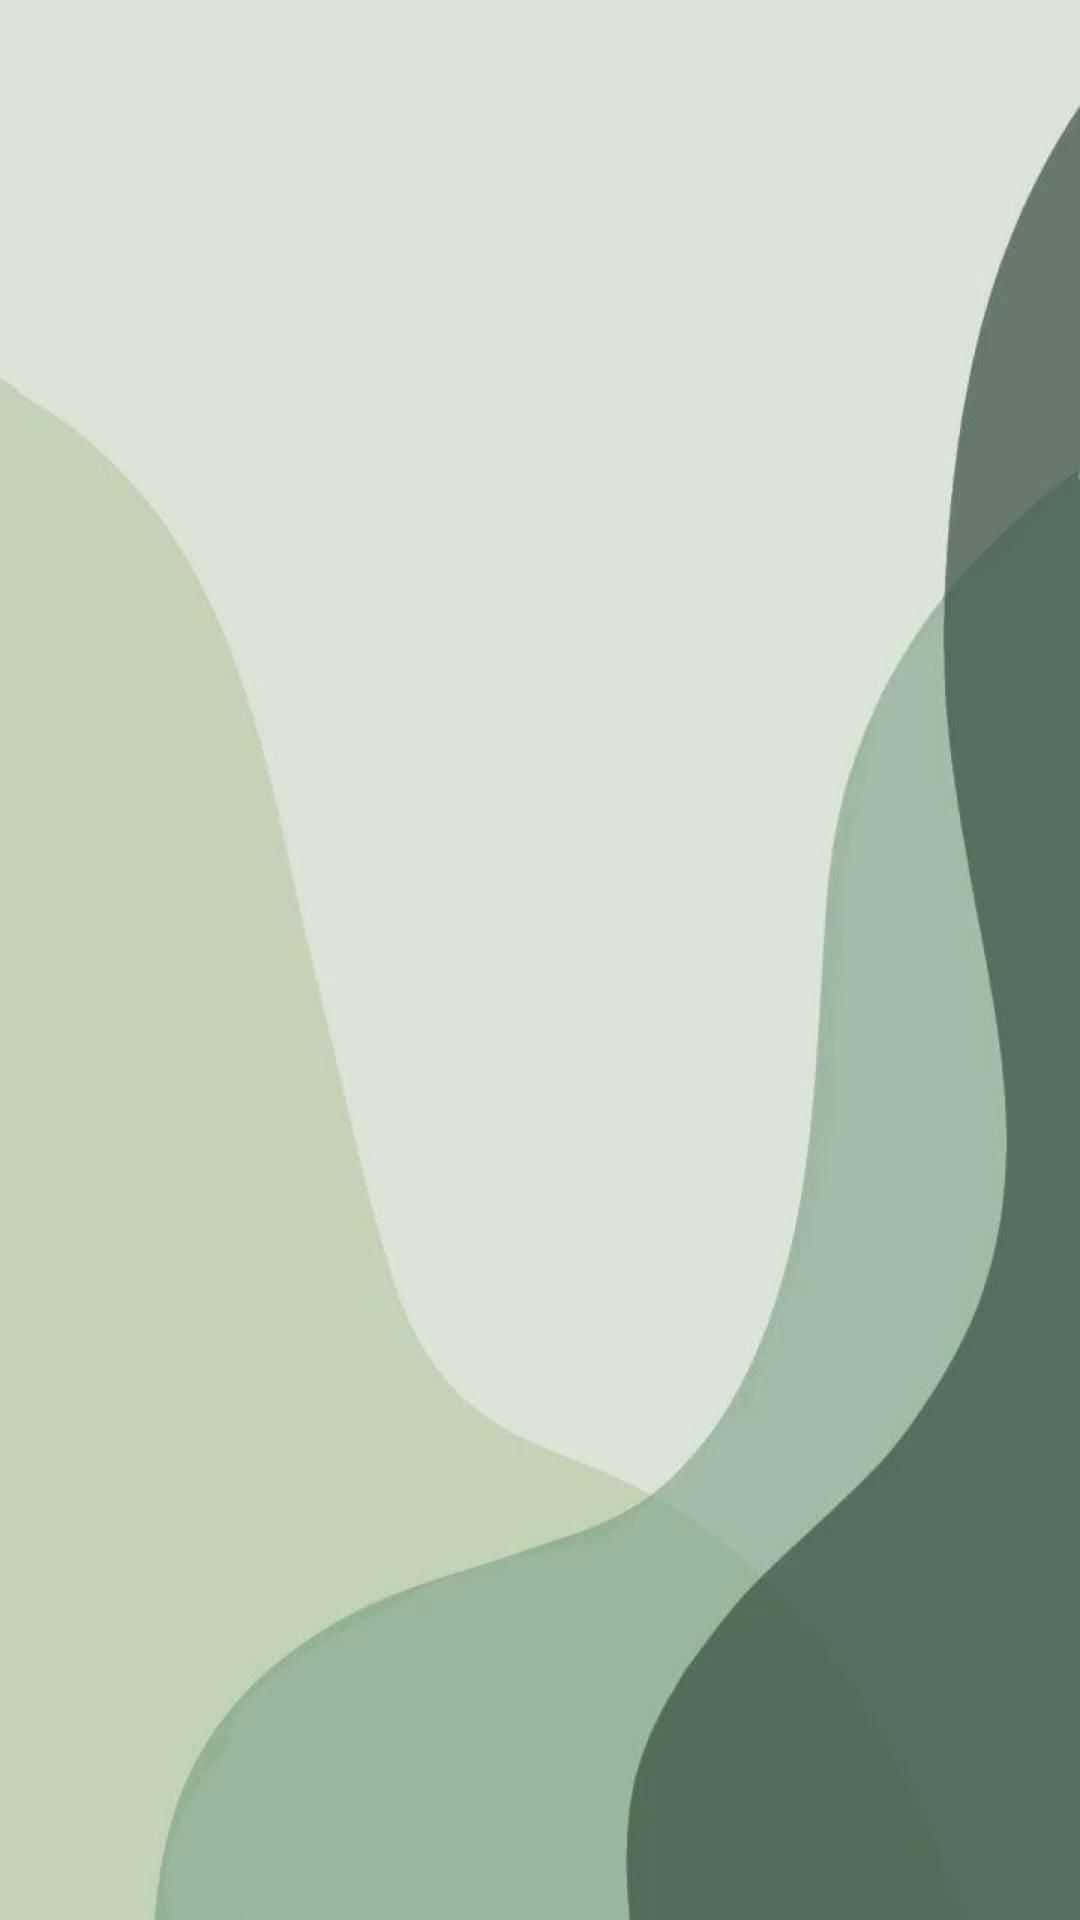 Cute Sage Green See Through Curving Slope Shapes